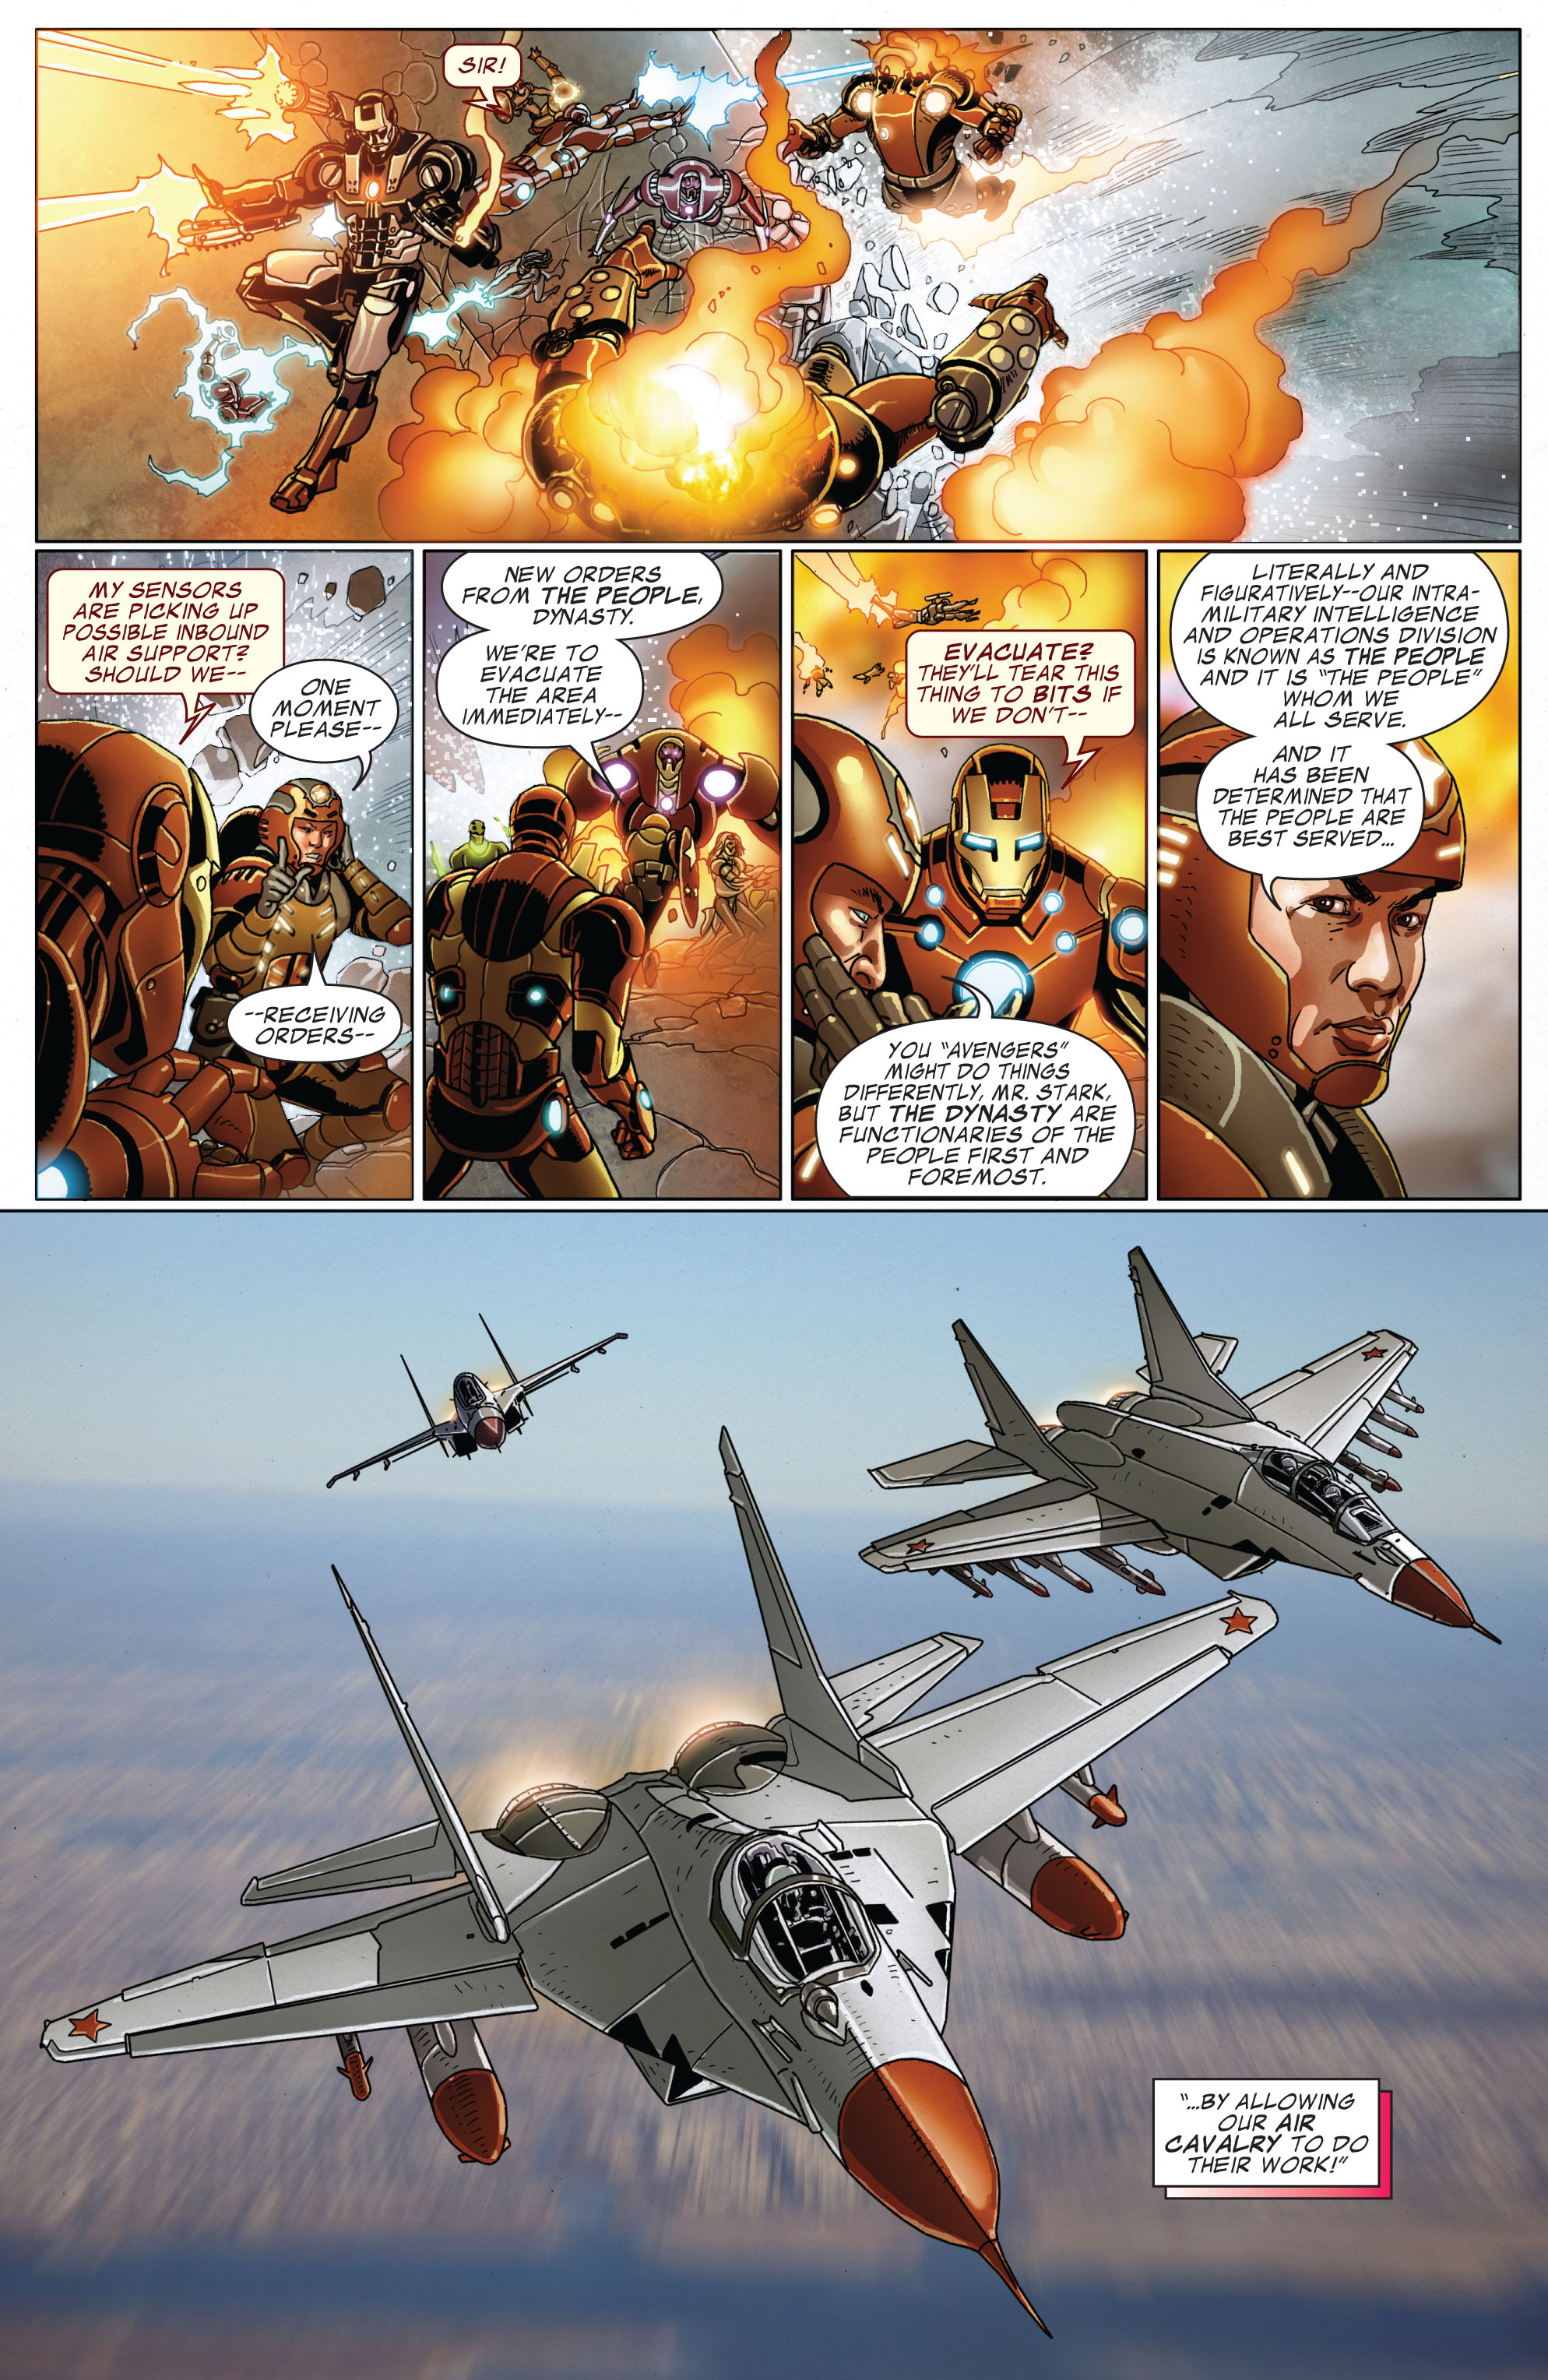 Invincible Iron Man (2008) 513 Page 13